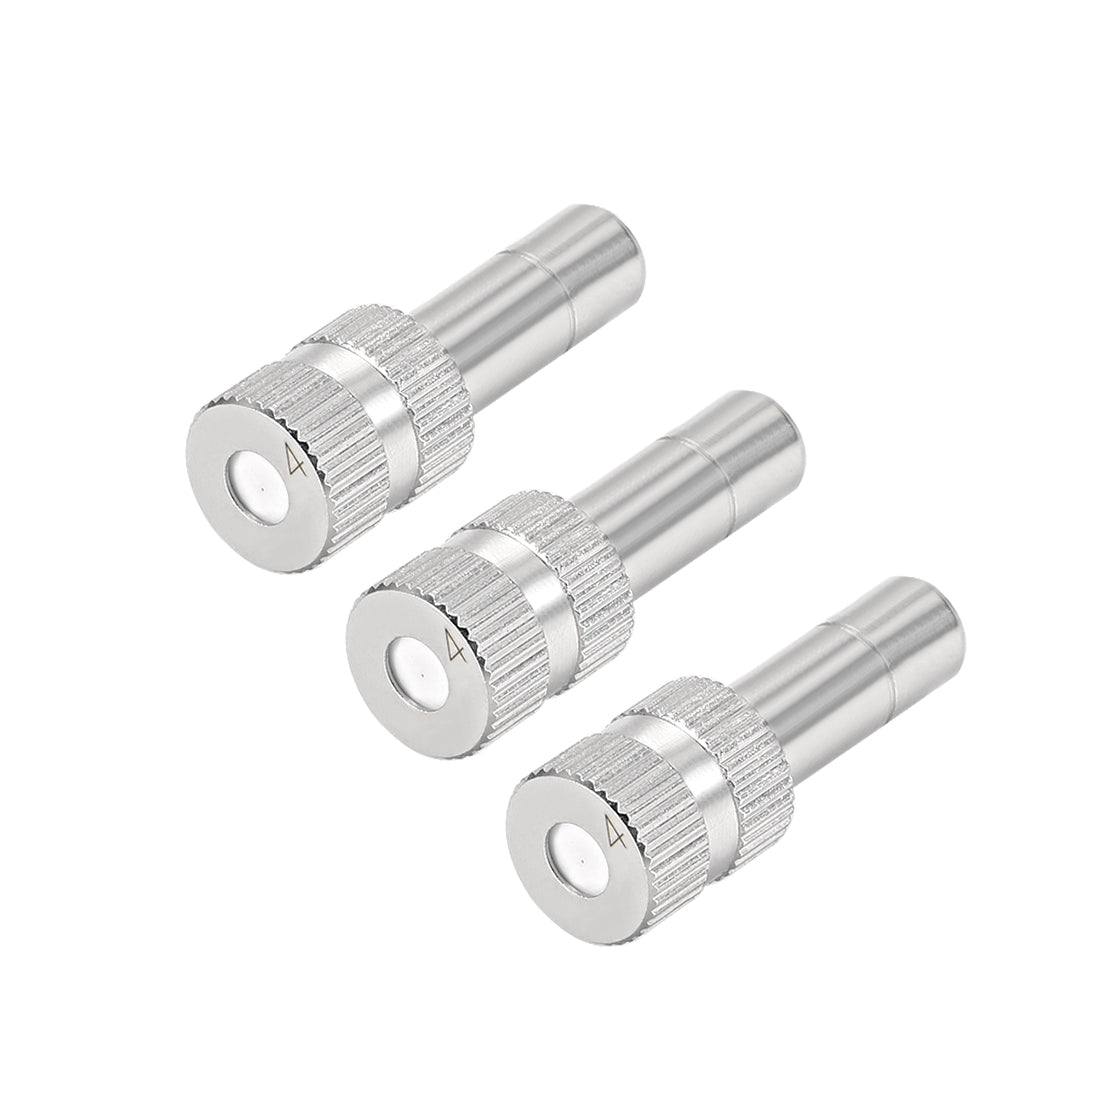 uxcell Uxcell Brass Misting Nozzle 0.016-inch 0.4mm Orifice for 6mm Quick Connector 3Pcs